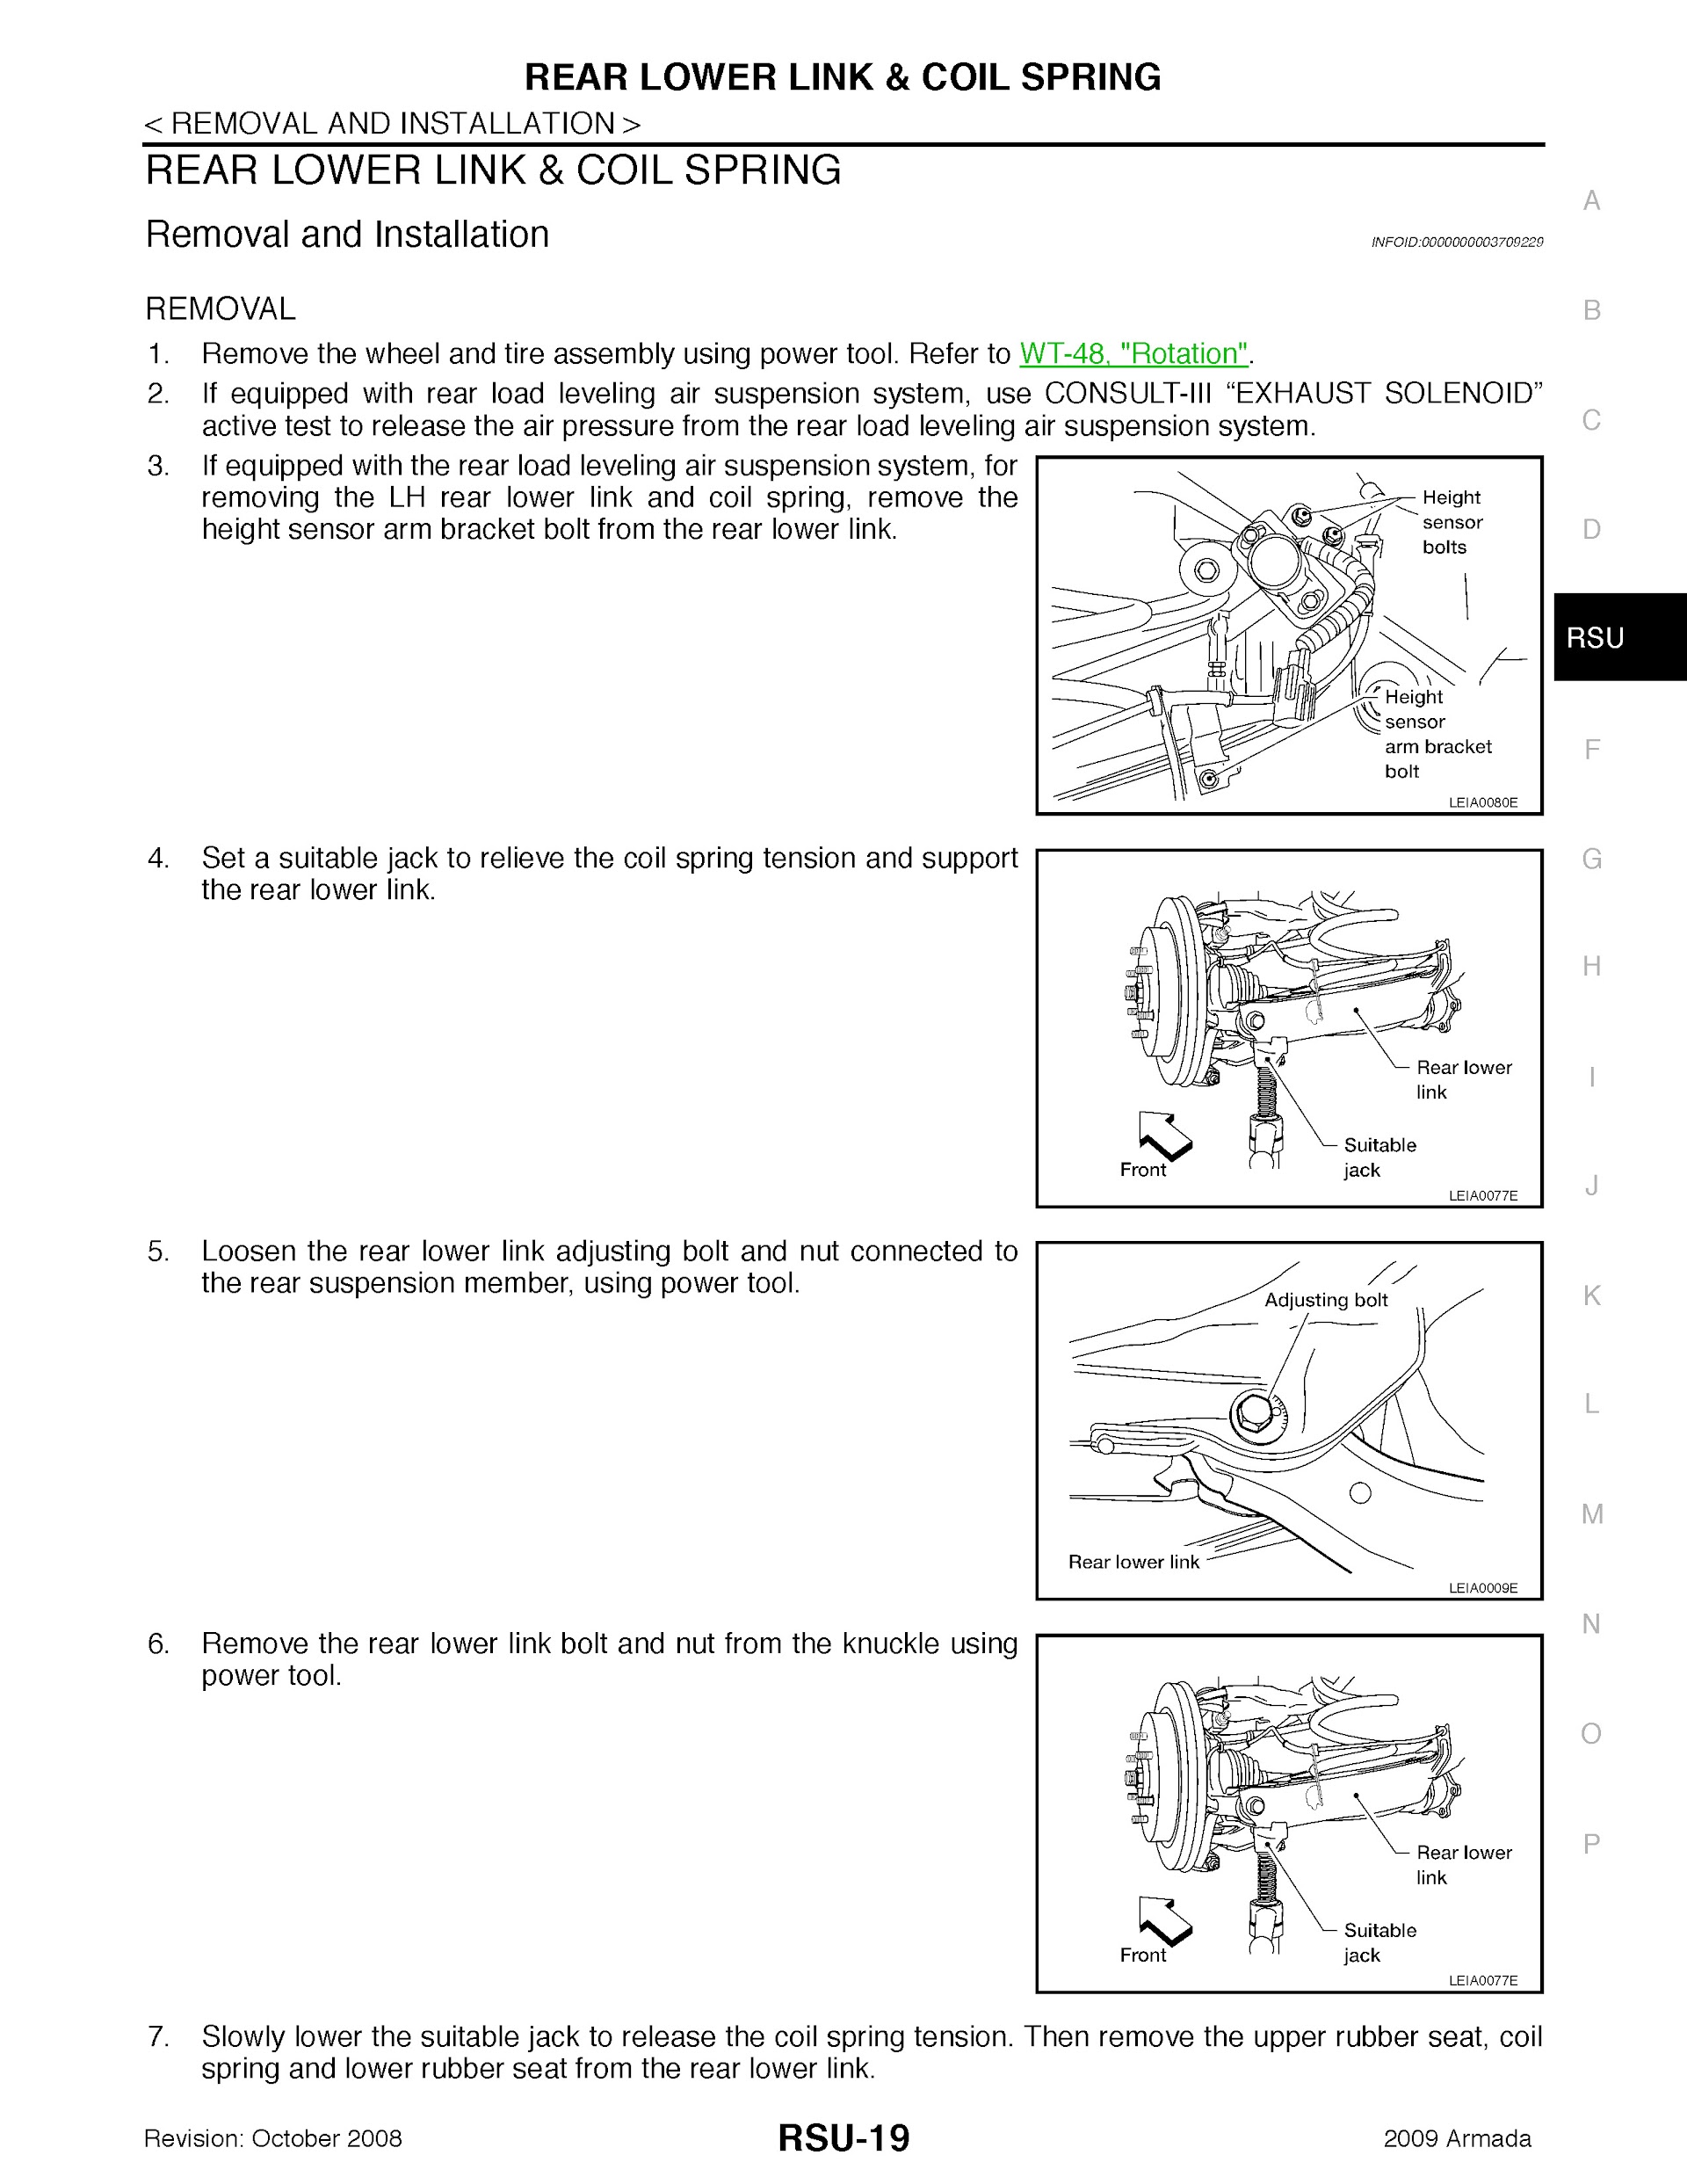 2009 Nissan Armada Repair Manual, Rear lower Link and Coil Spring Removal and Installation